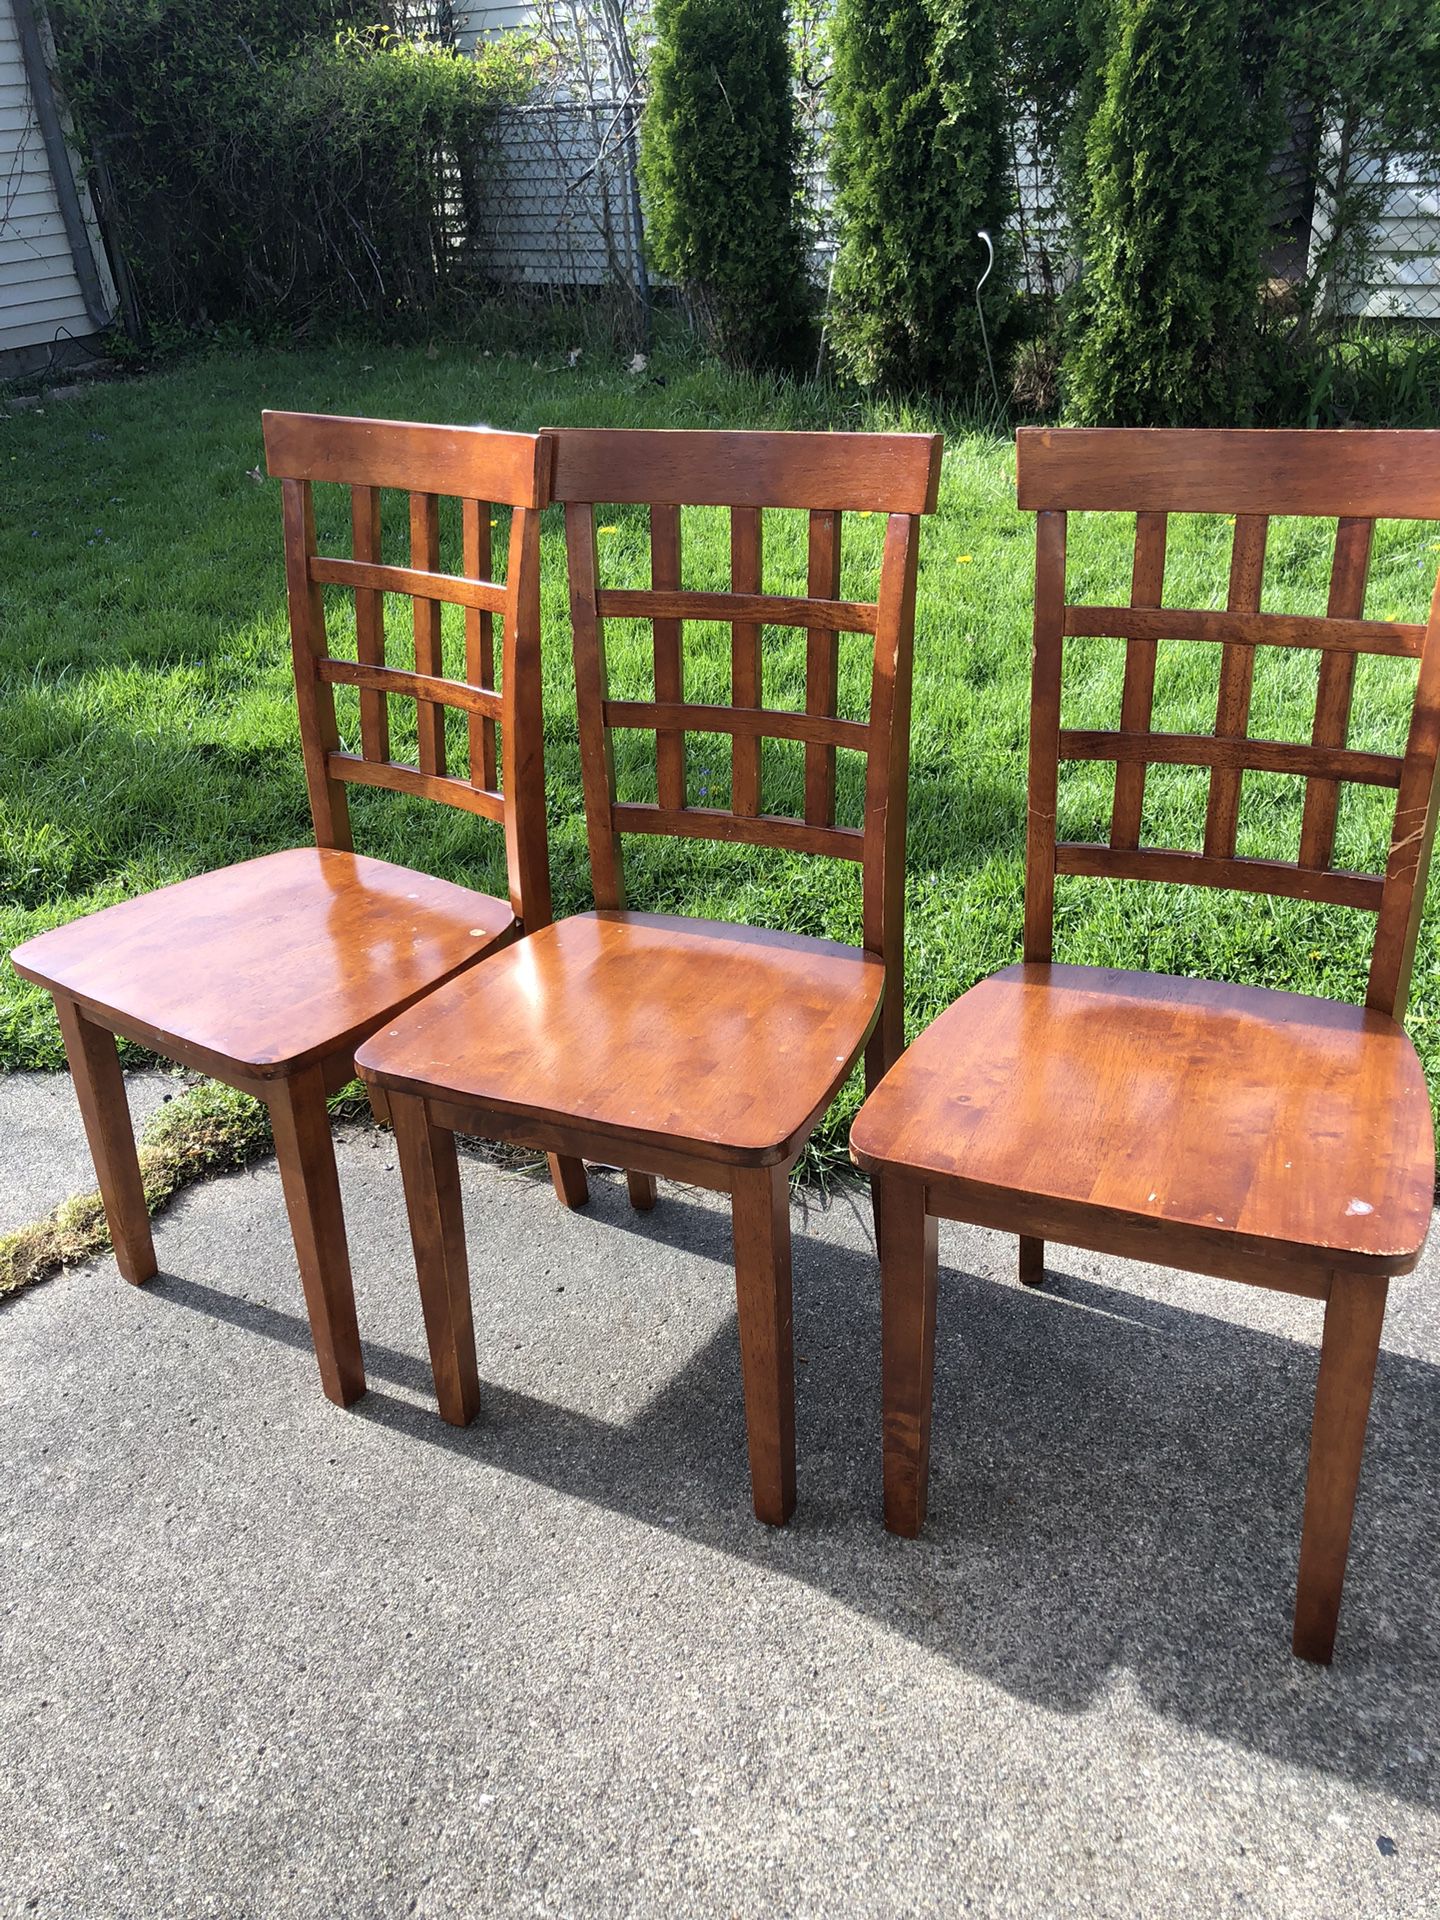 3 Dining chairs